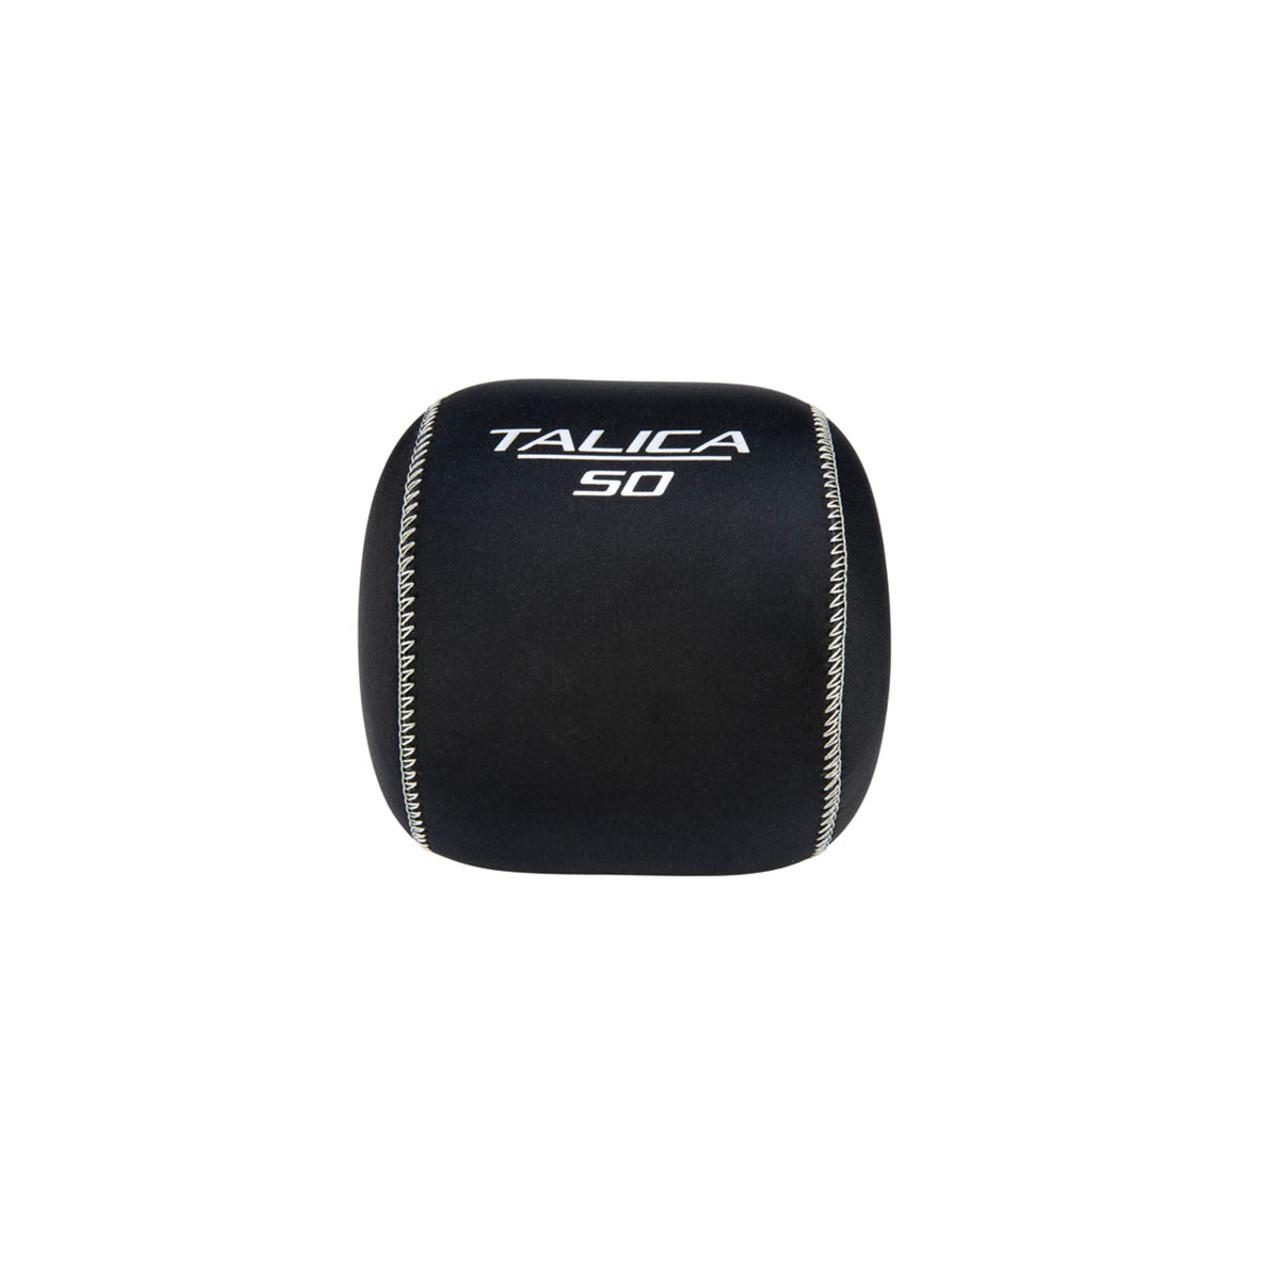 SHIMANO Talica Conventional Reel Cover 12-16